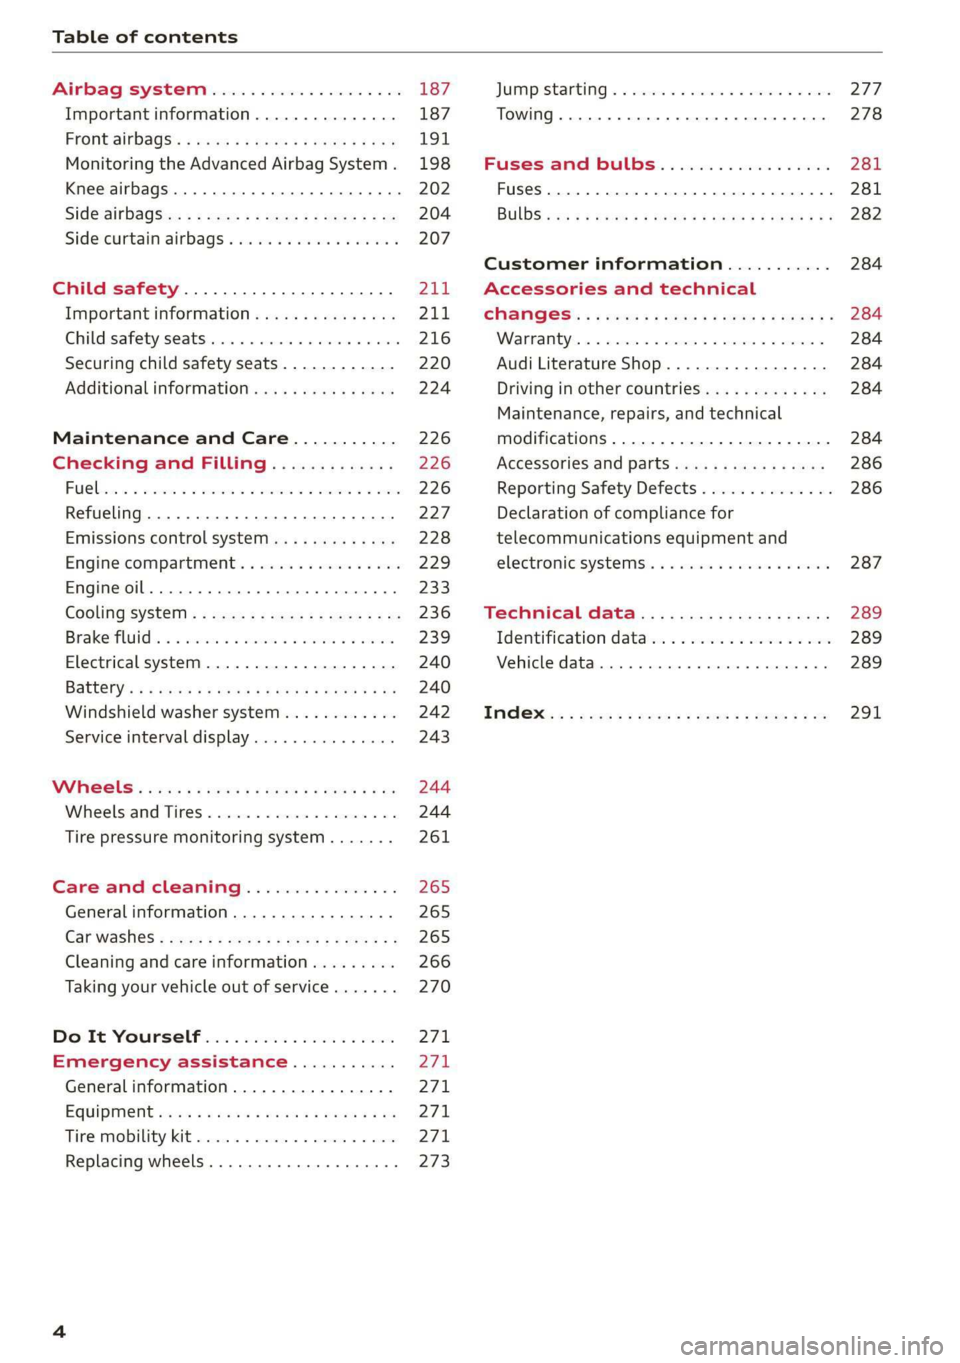 AUDI R8 COUPE 2020  Owners Manual Table of contents 
  
Airbagisy Stems: «5 ssisces oe swwewes w  8 on 
Important information............... 
FrONt airbags: « sews ss maw 5 2 oes * eee 
Monitoring the Advanced Airbag System . 
Knee 